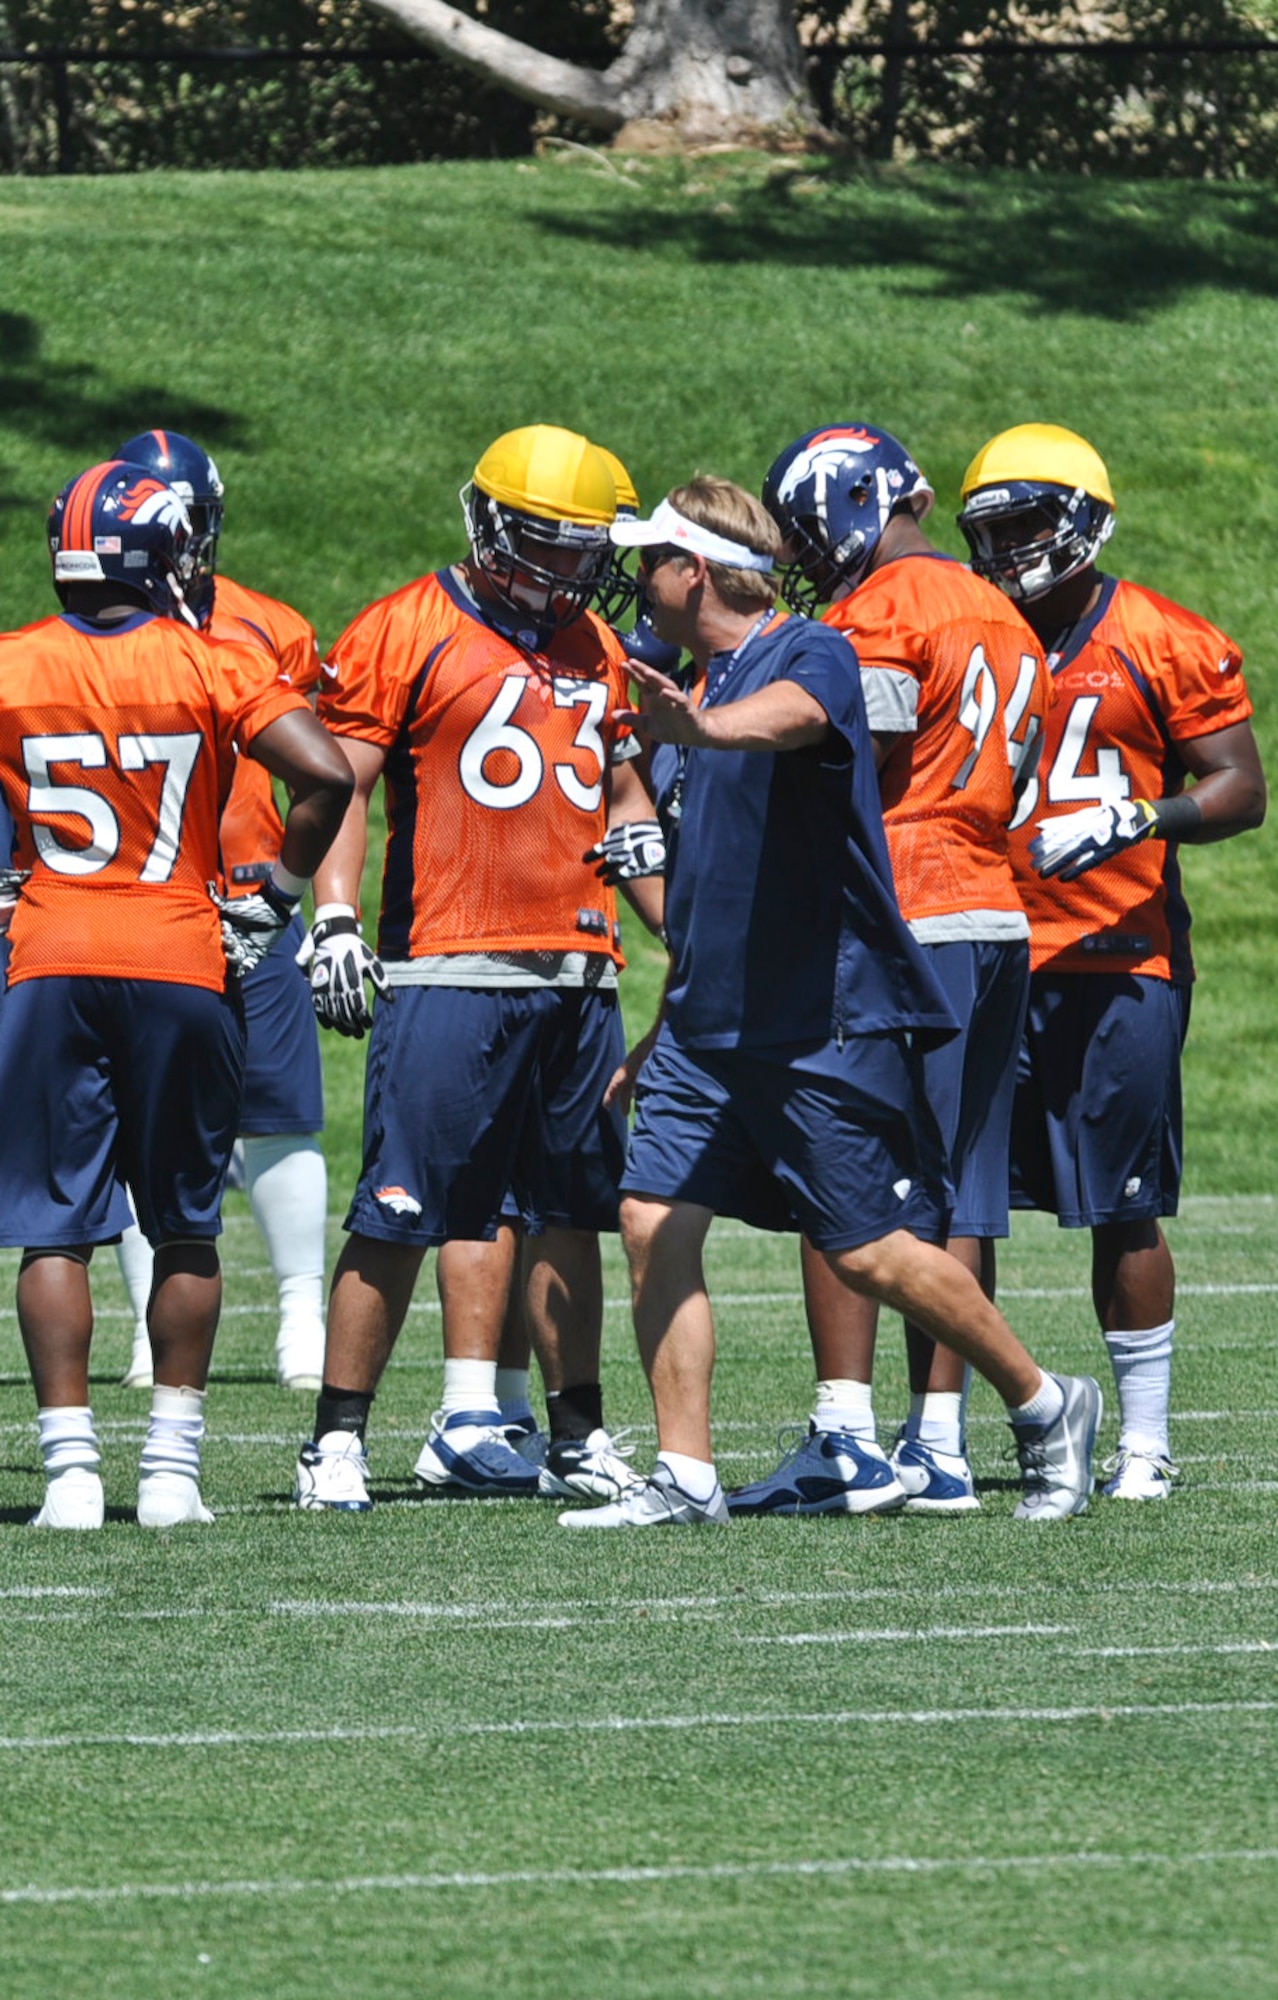 ENGLEWOOD, Colo. – Benjamin Garland, along with other Denver Bronco teammates, receives advice from a coach during a mini-camp session June 13, 2012. Garland, a Grand Junction, Colo. native, not only plays professional football, but is also assigned to the  140 Wing Public Affairs Office, Colorado Air National Guard. (U.S. Air Force photo by Senior Airman Christopher Gross)